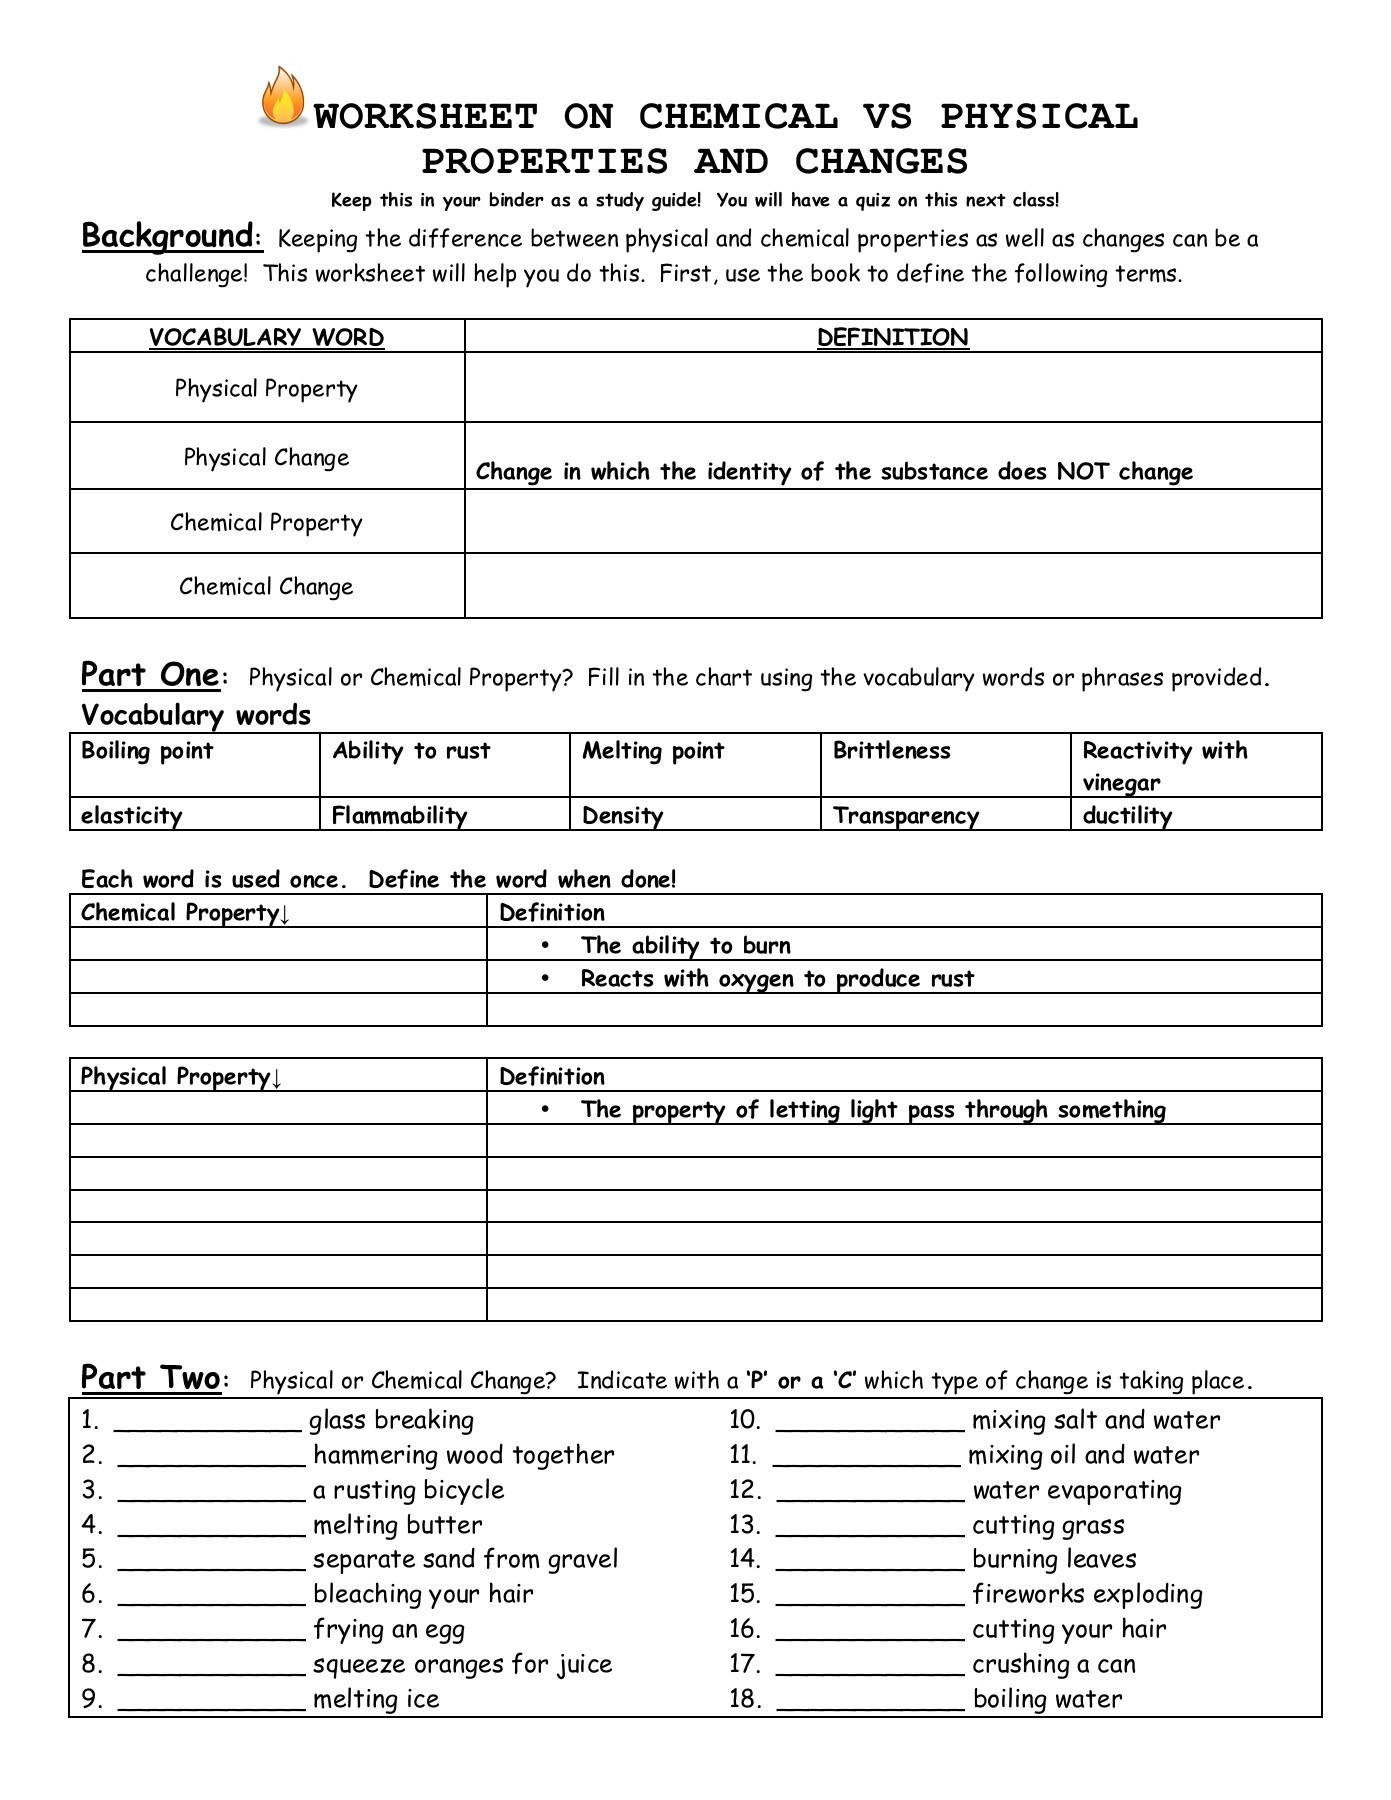 Chemical and Physical Changes Worksheet Worksheet On Chemical Vs Physical Properties and Changes